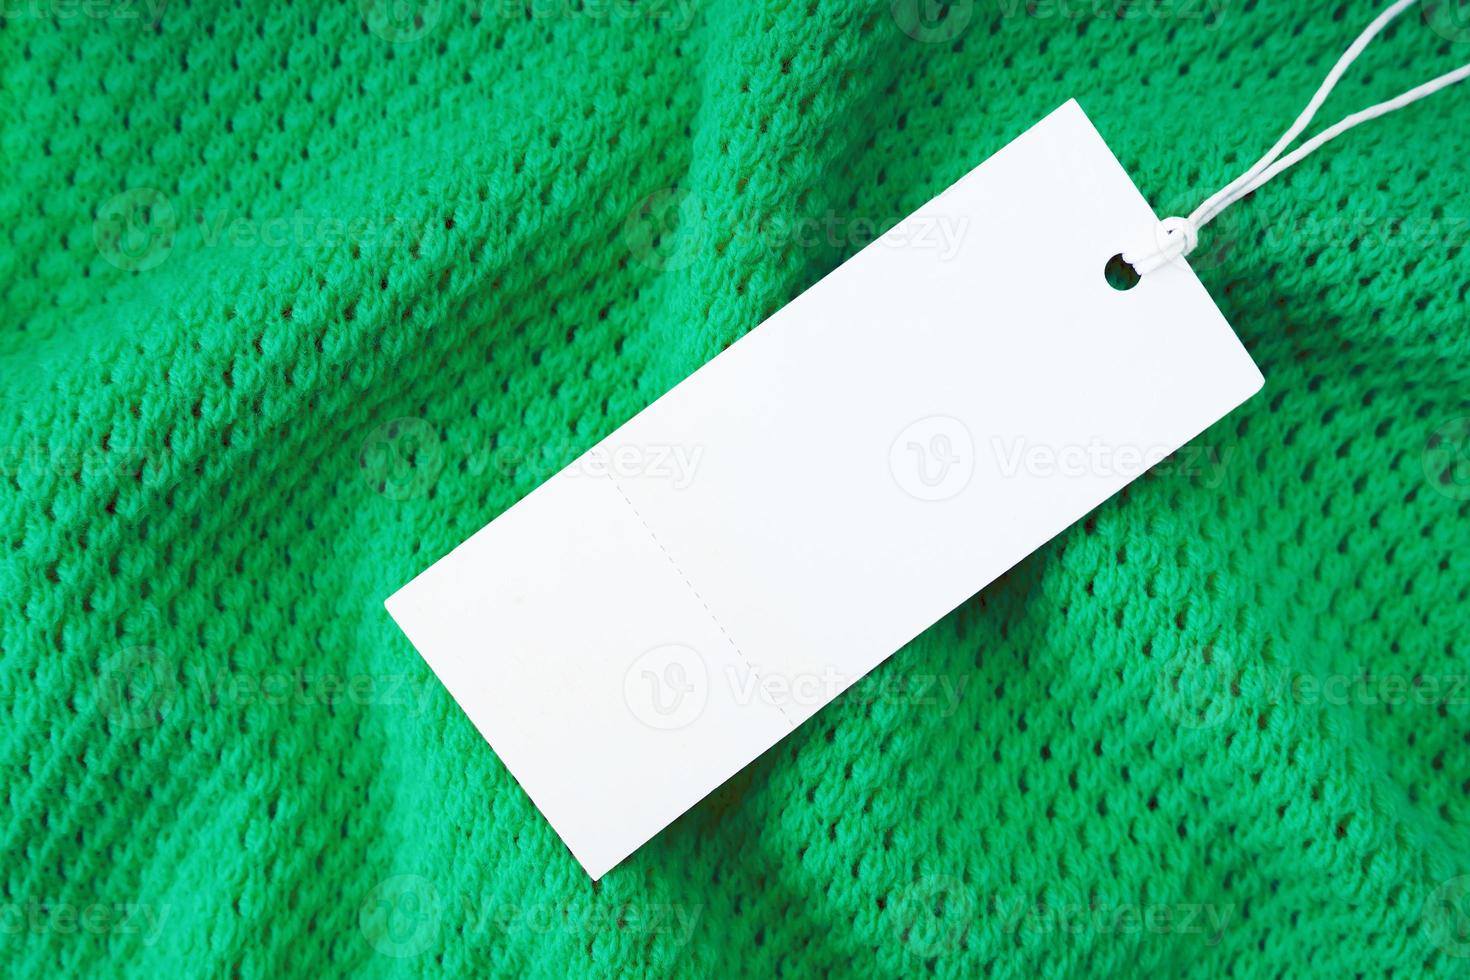 White blank rectangular clothing tag on green knitted fabric background. Shopping, sale, discount mockup photo